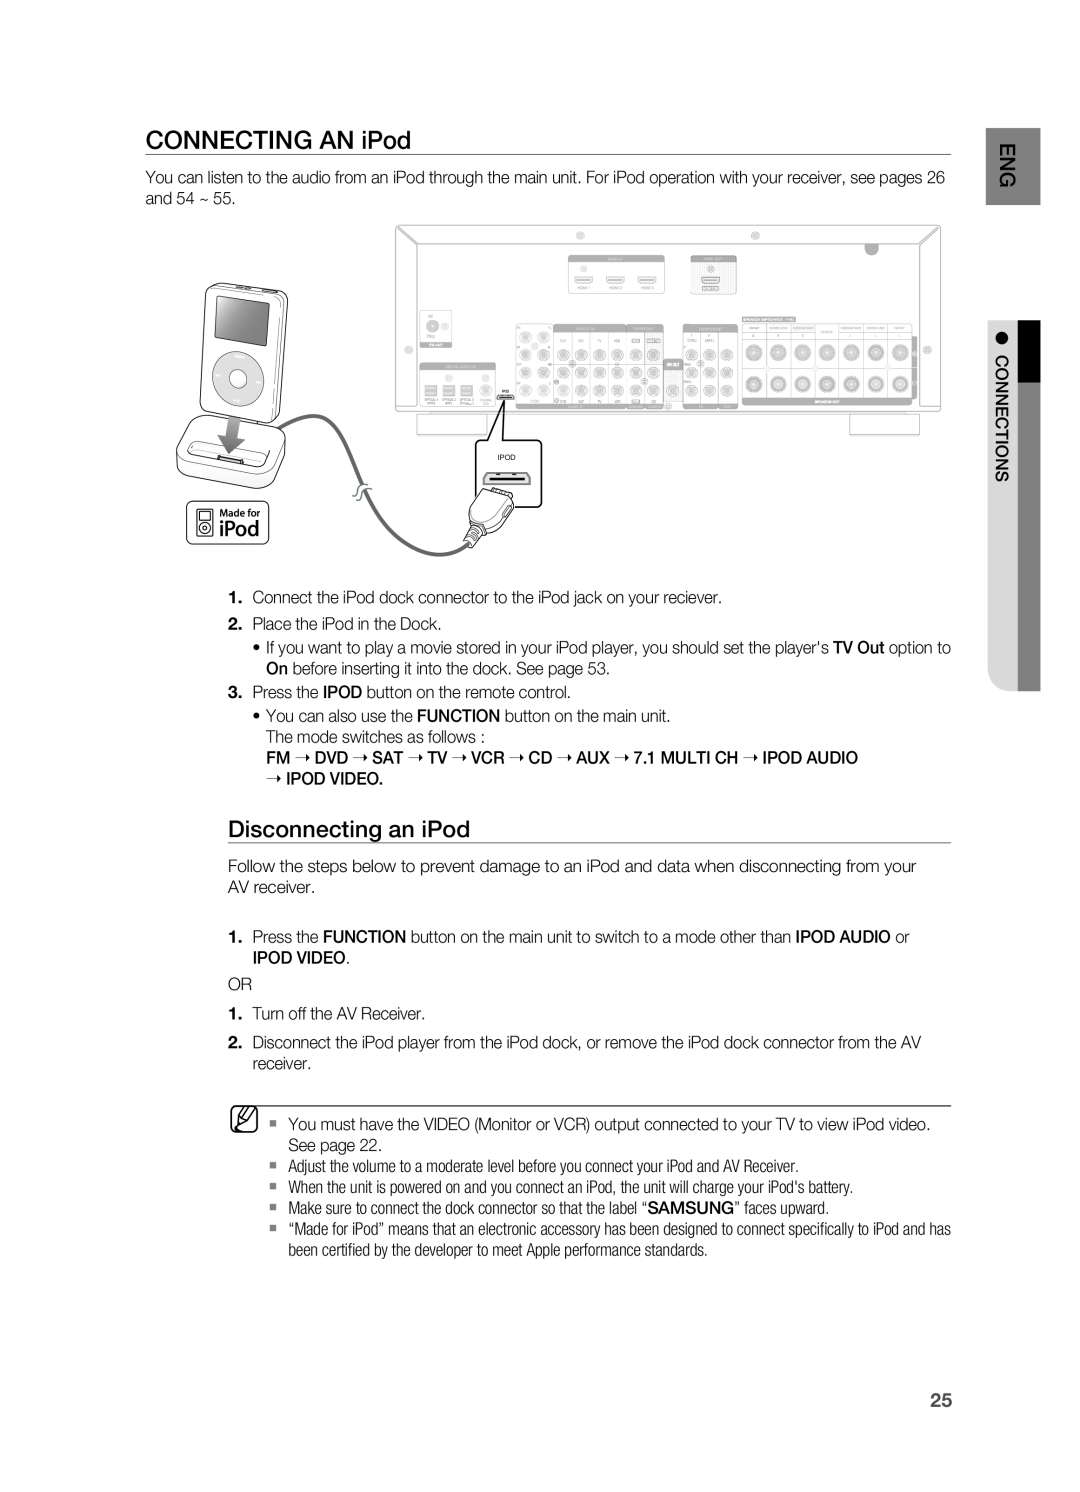 Samsung HT-AS730ST user manual Connecting an iPod, Disconnecting an iPod 